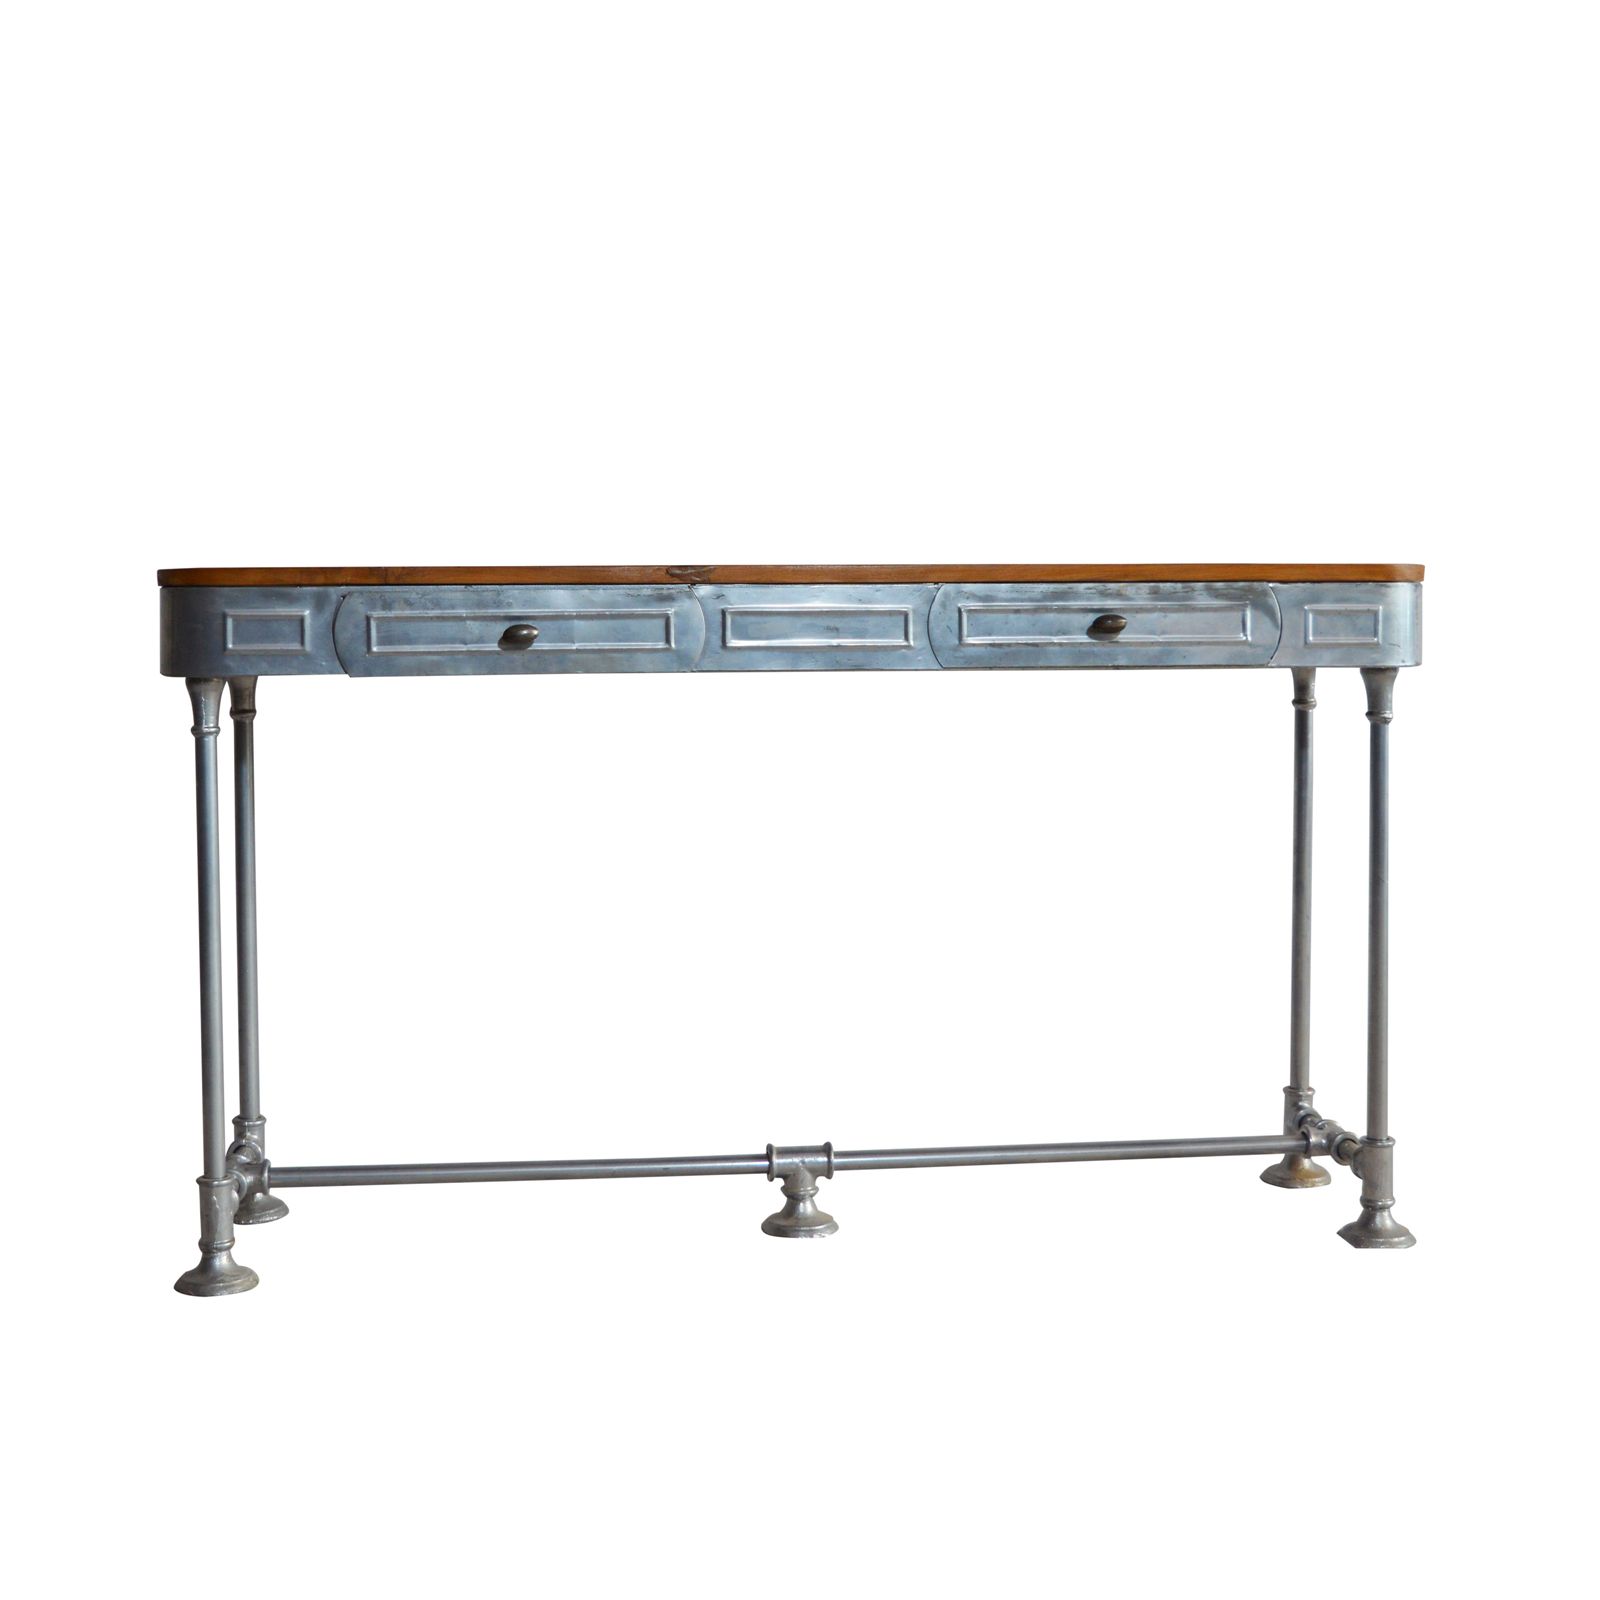 INDUSTRIAL CONSOLE TABLE TWO DRAWER TEAK TOP NATURAL FINISH